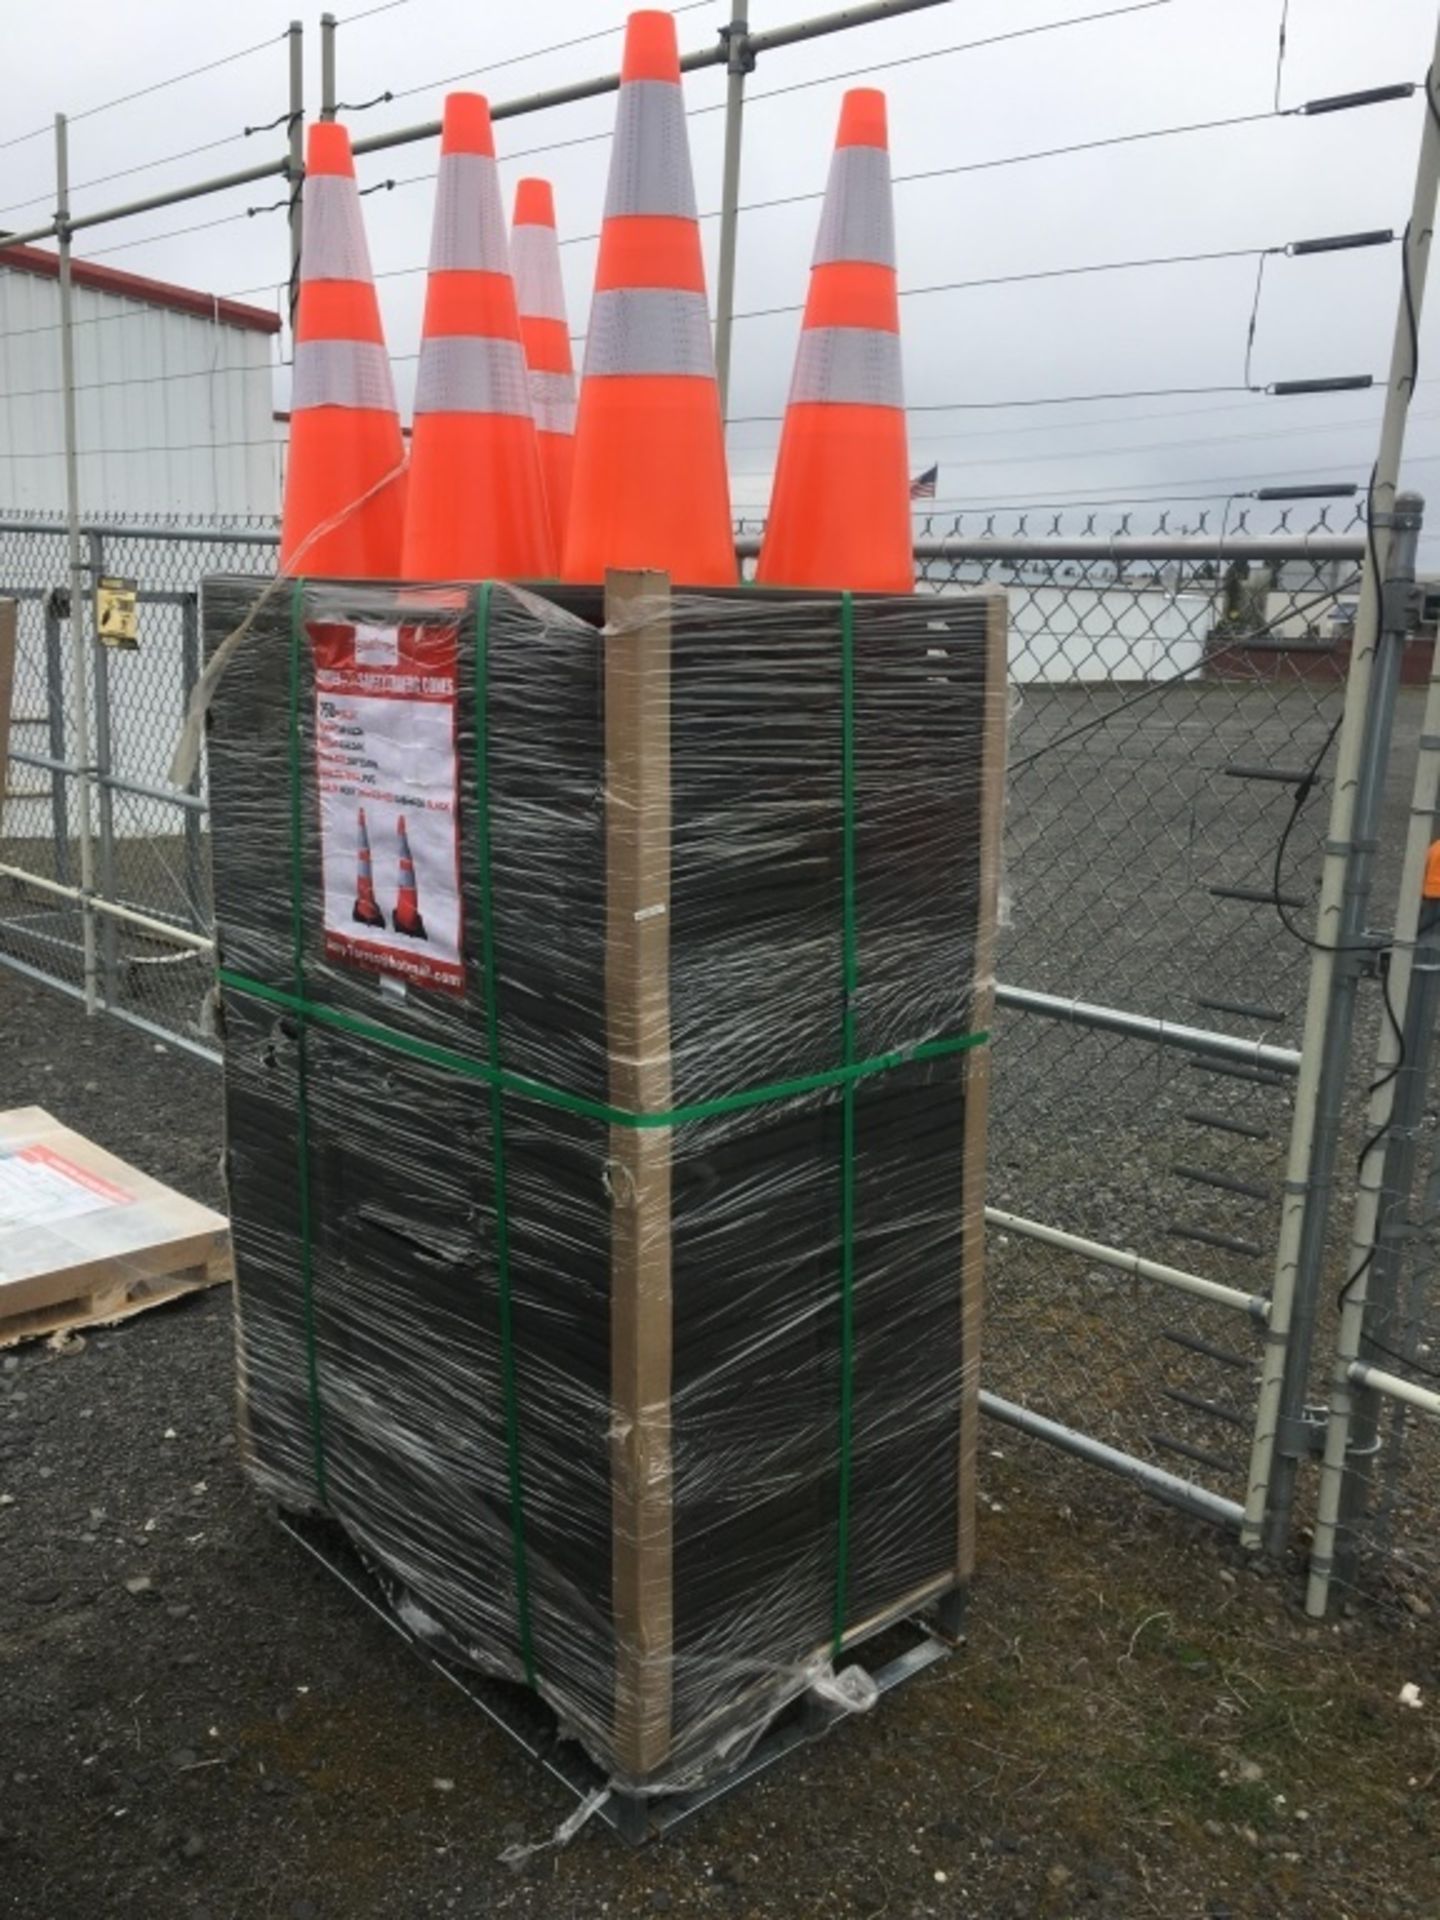 2021 Safety Highway Cones, Qty. 250 - Image 5 of 6